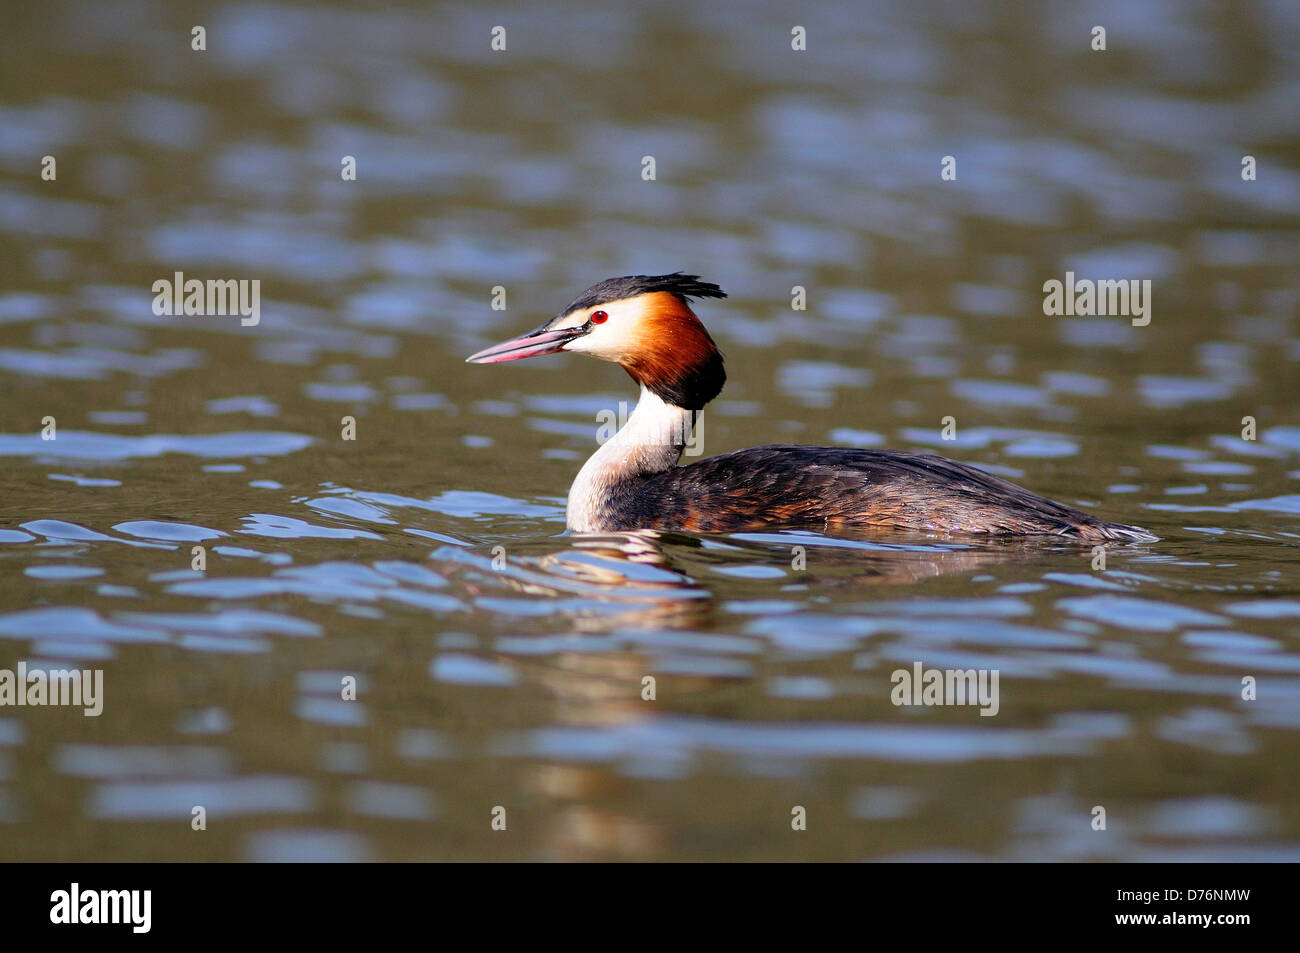 A great crested grebe swimming Stock Photo